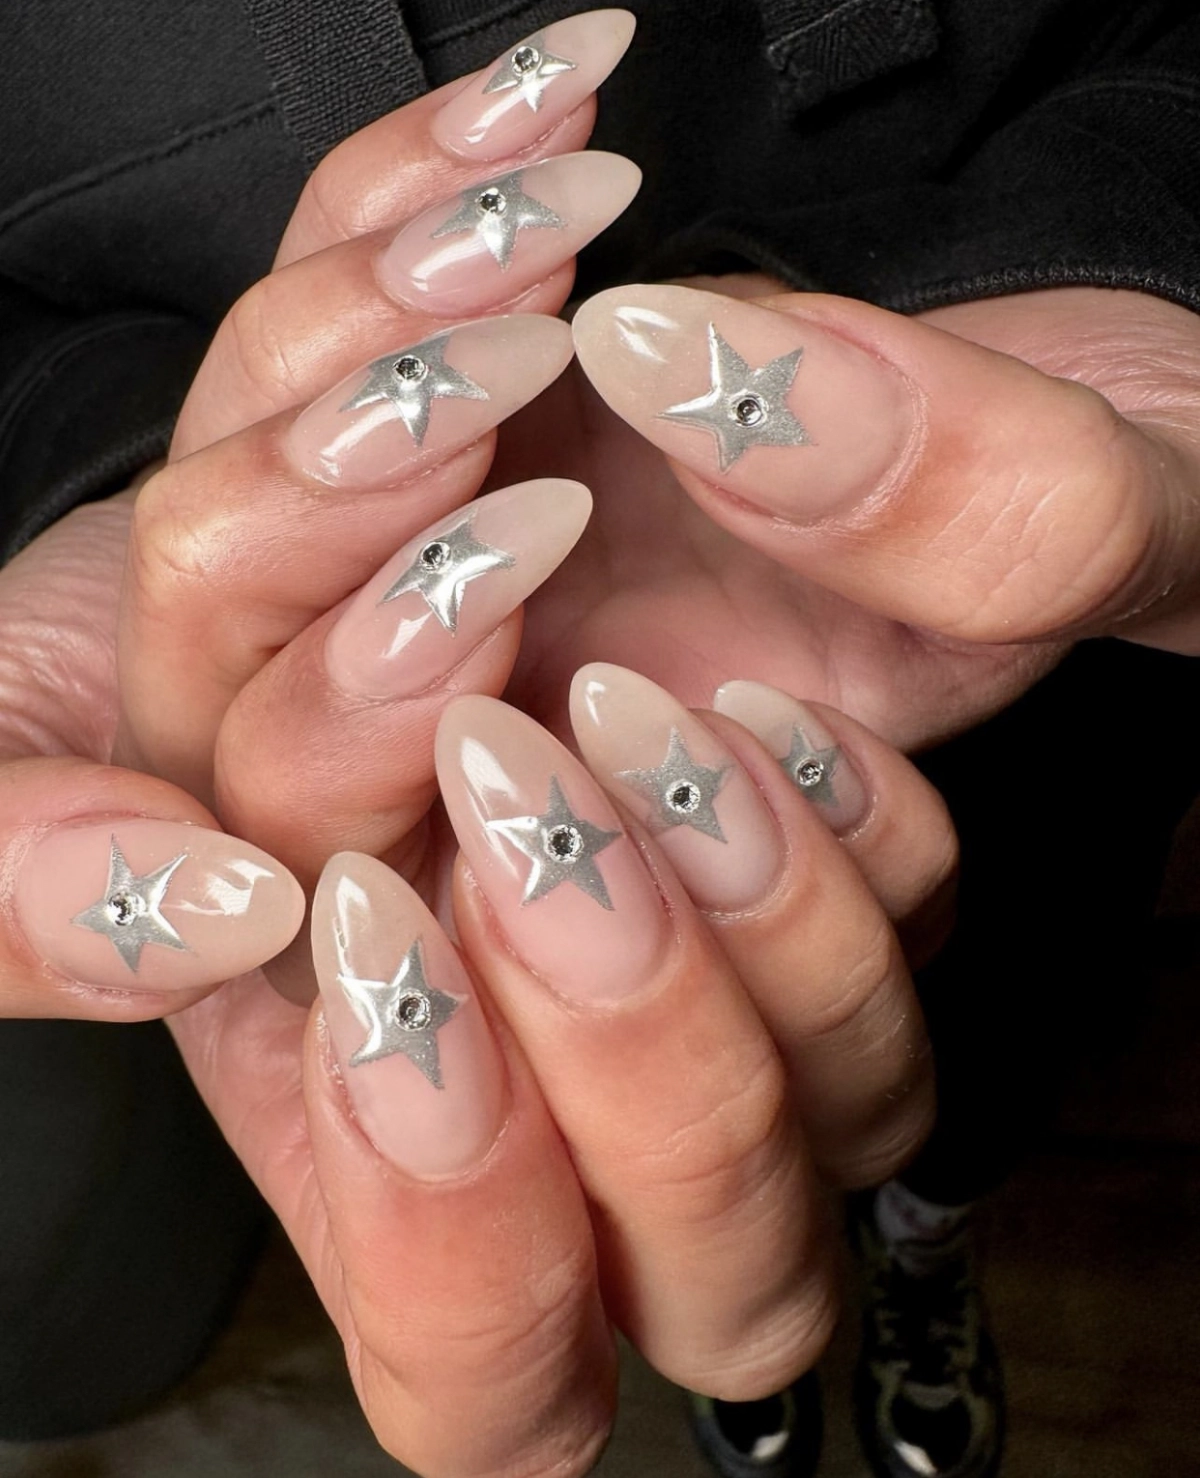 8 Nail Art Ideas That Are Perfect For A Smashing New Year's Eve